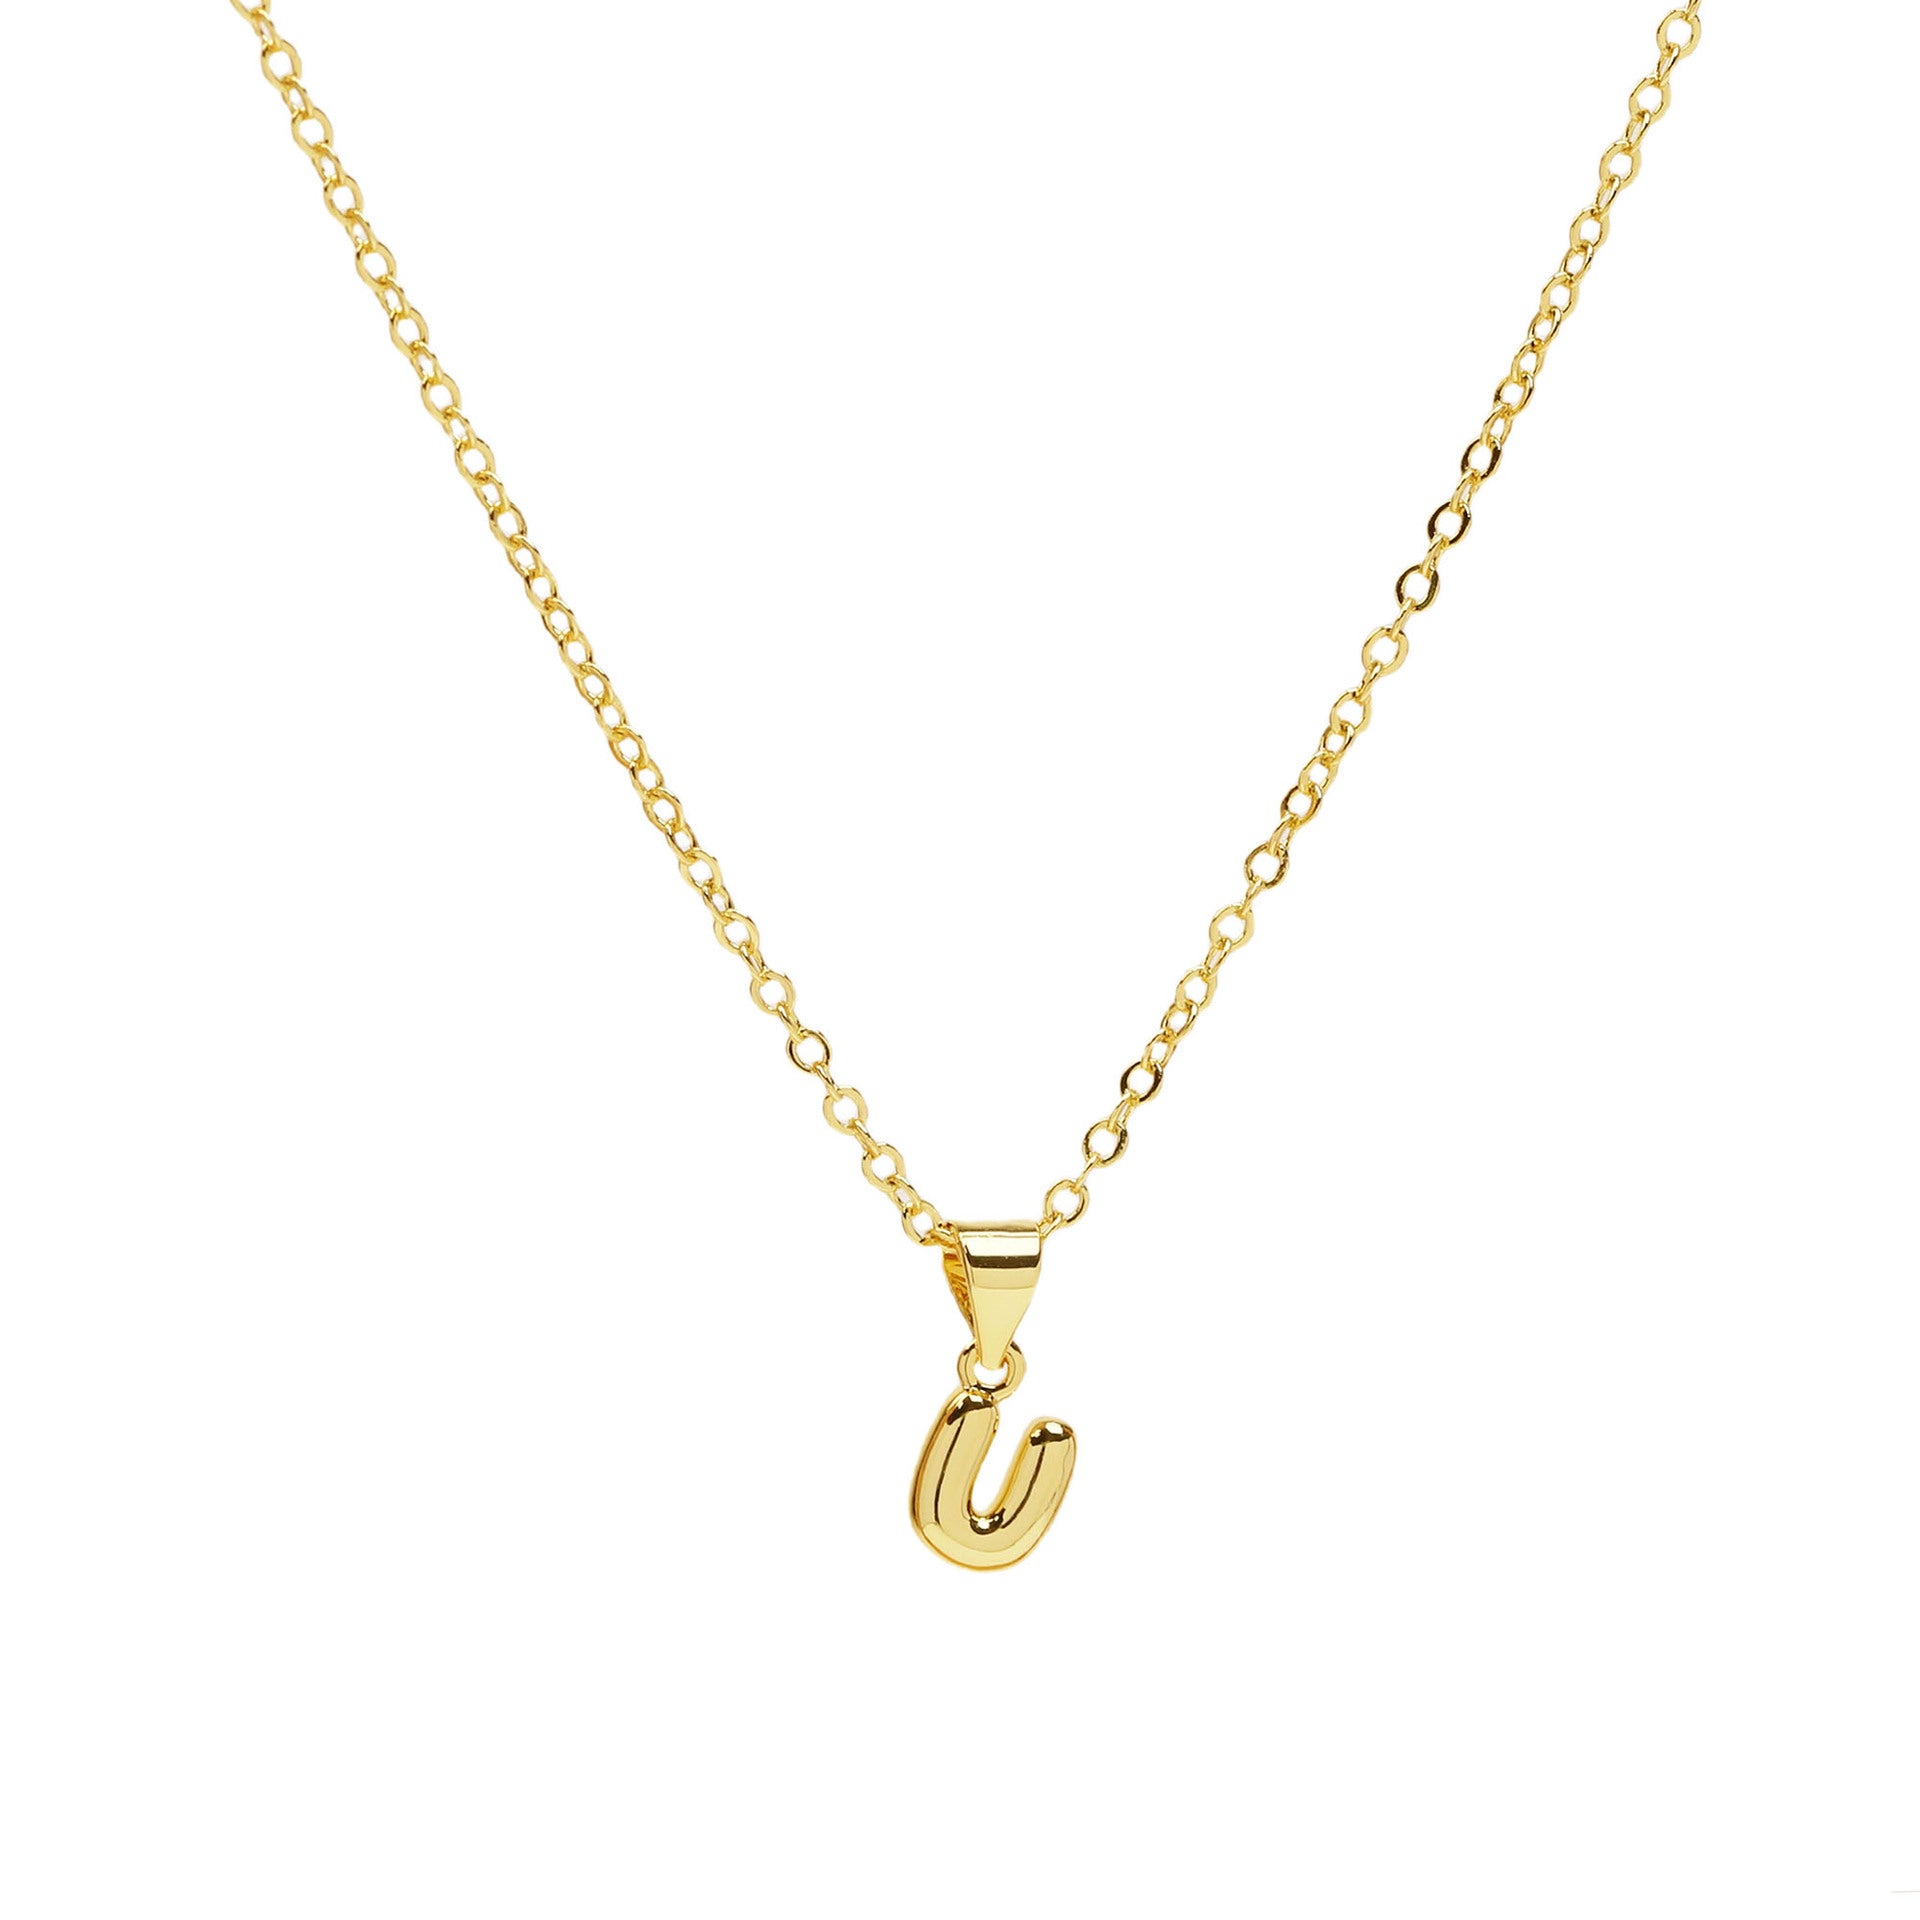 u initial necklace gold